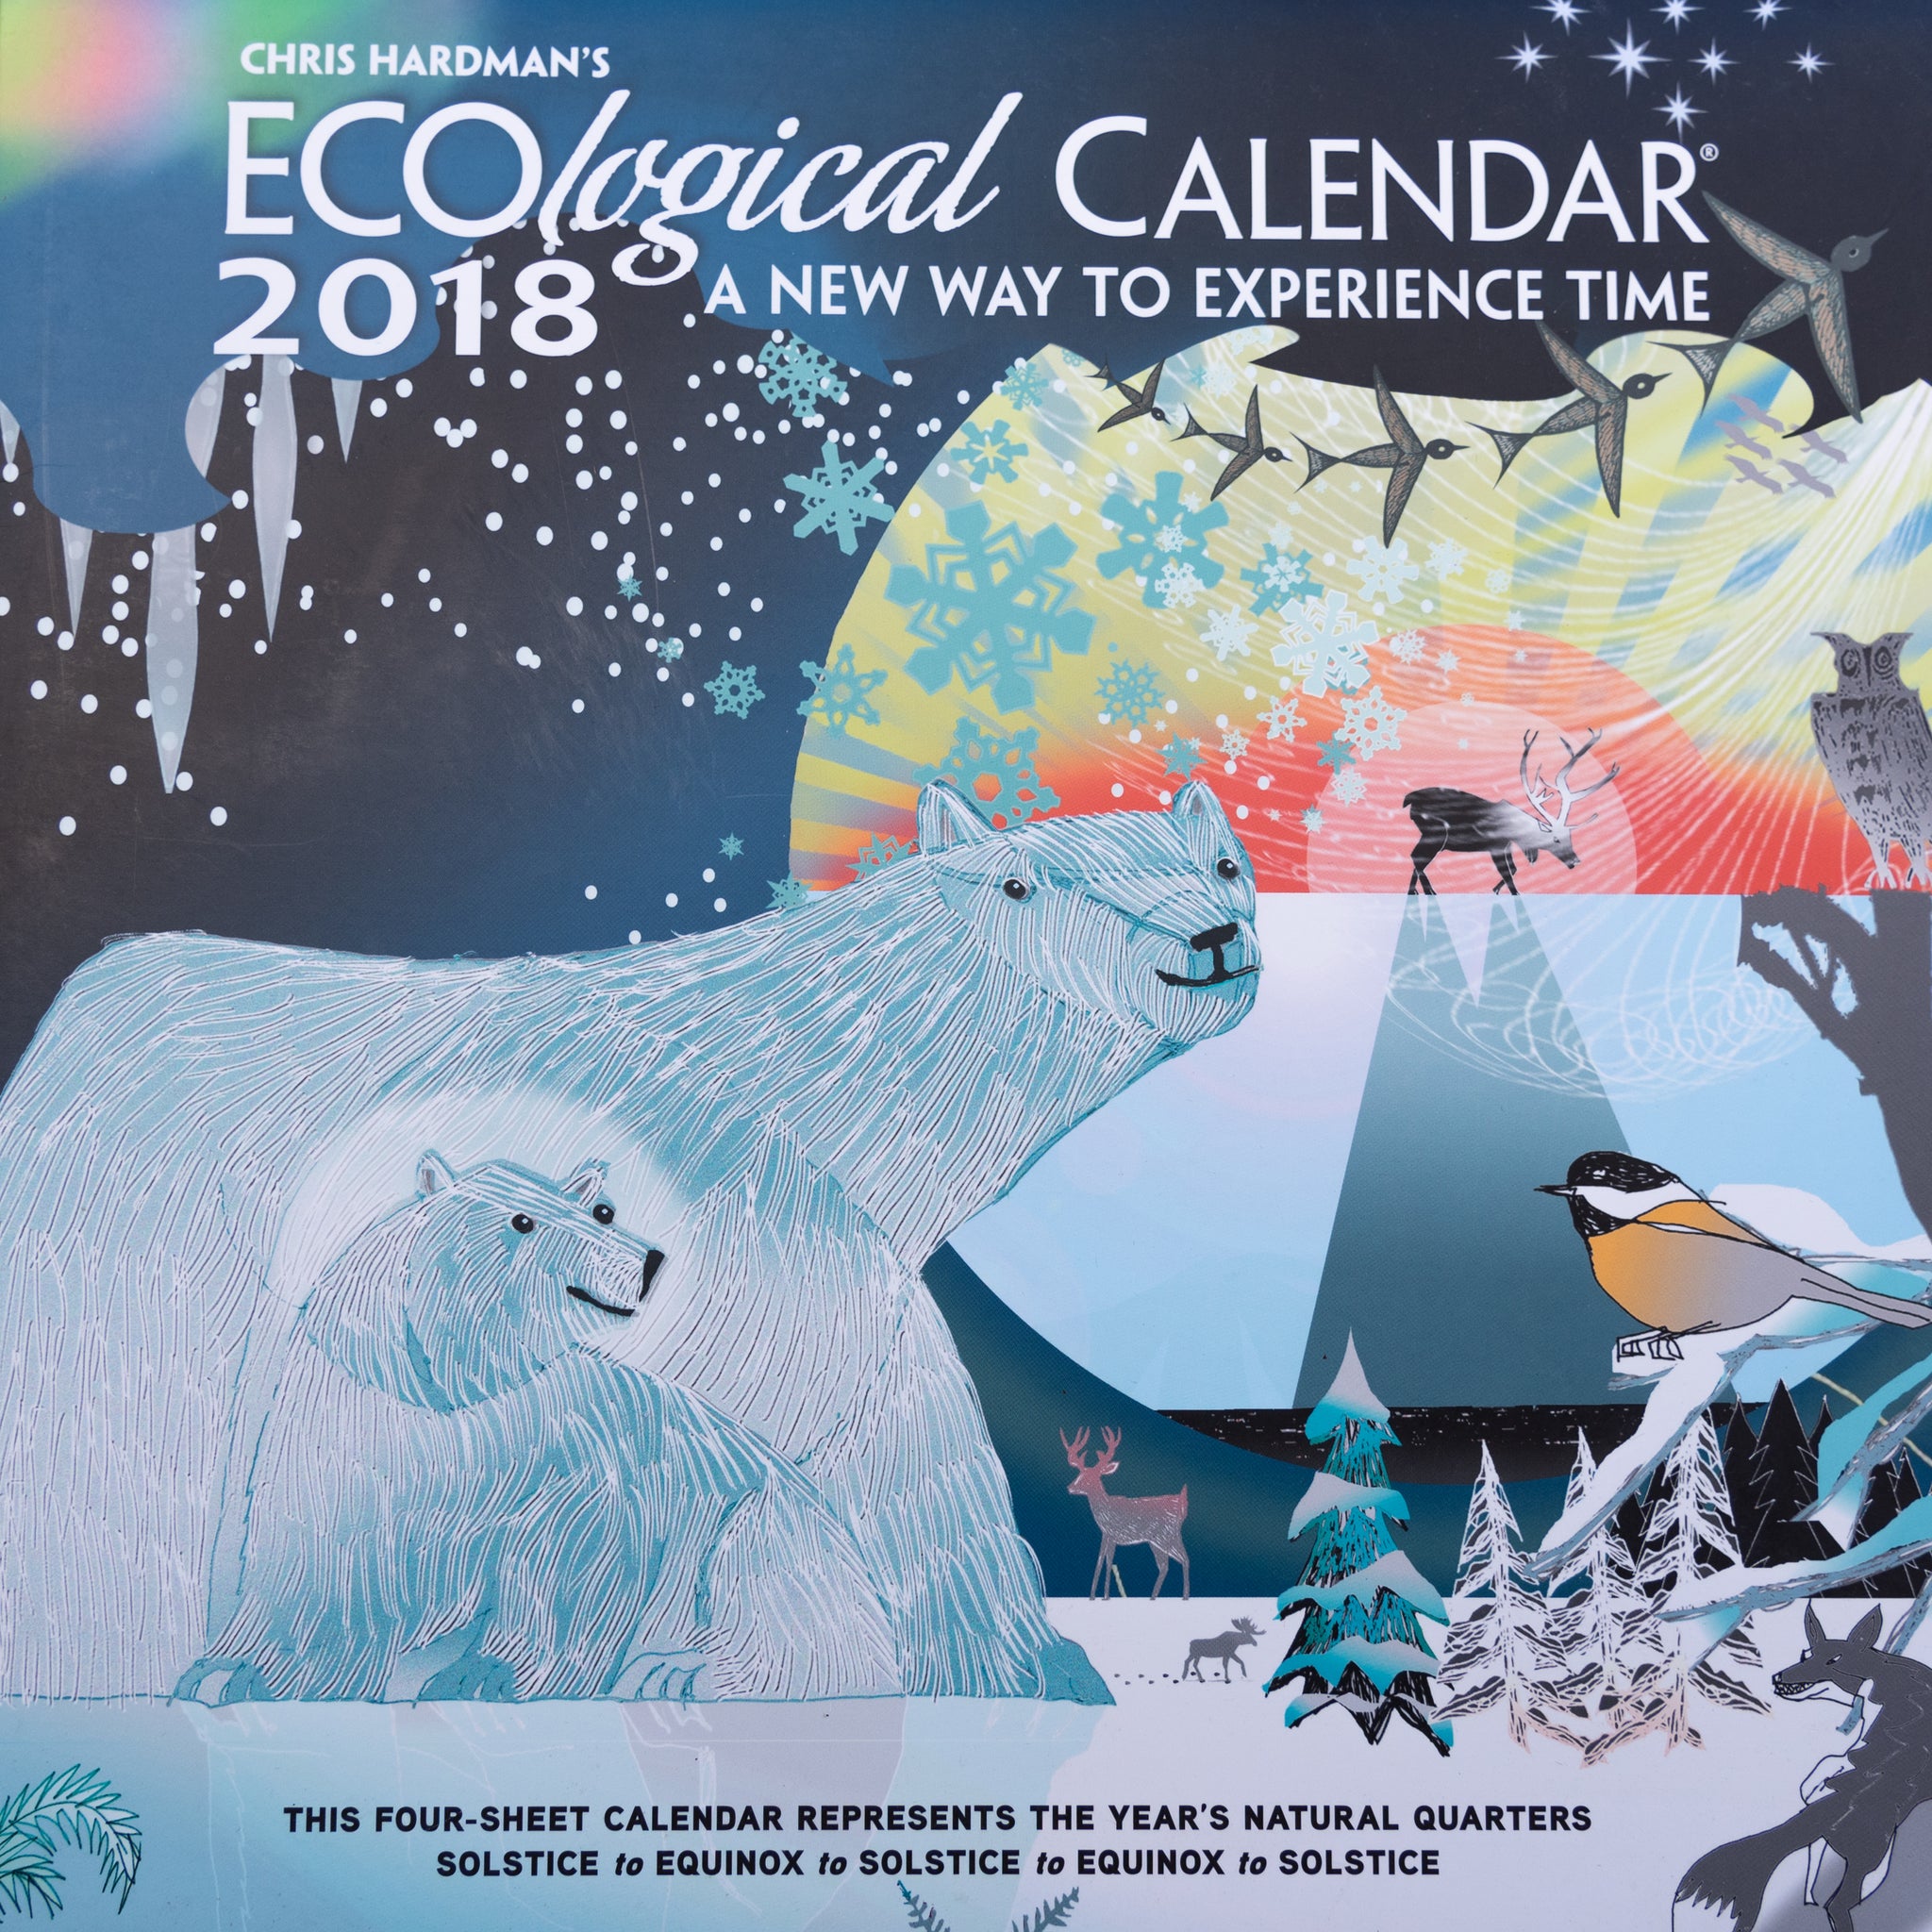 SOLD OUT!! Complete set of All ECOlogical Calendars 2005 -2021, FREE SHIPPING ON SET